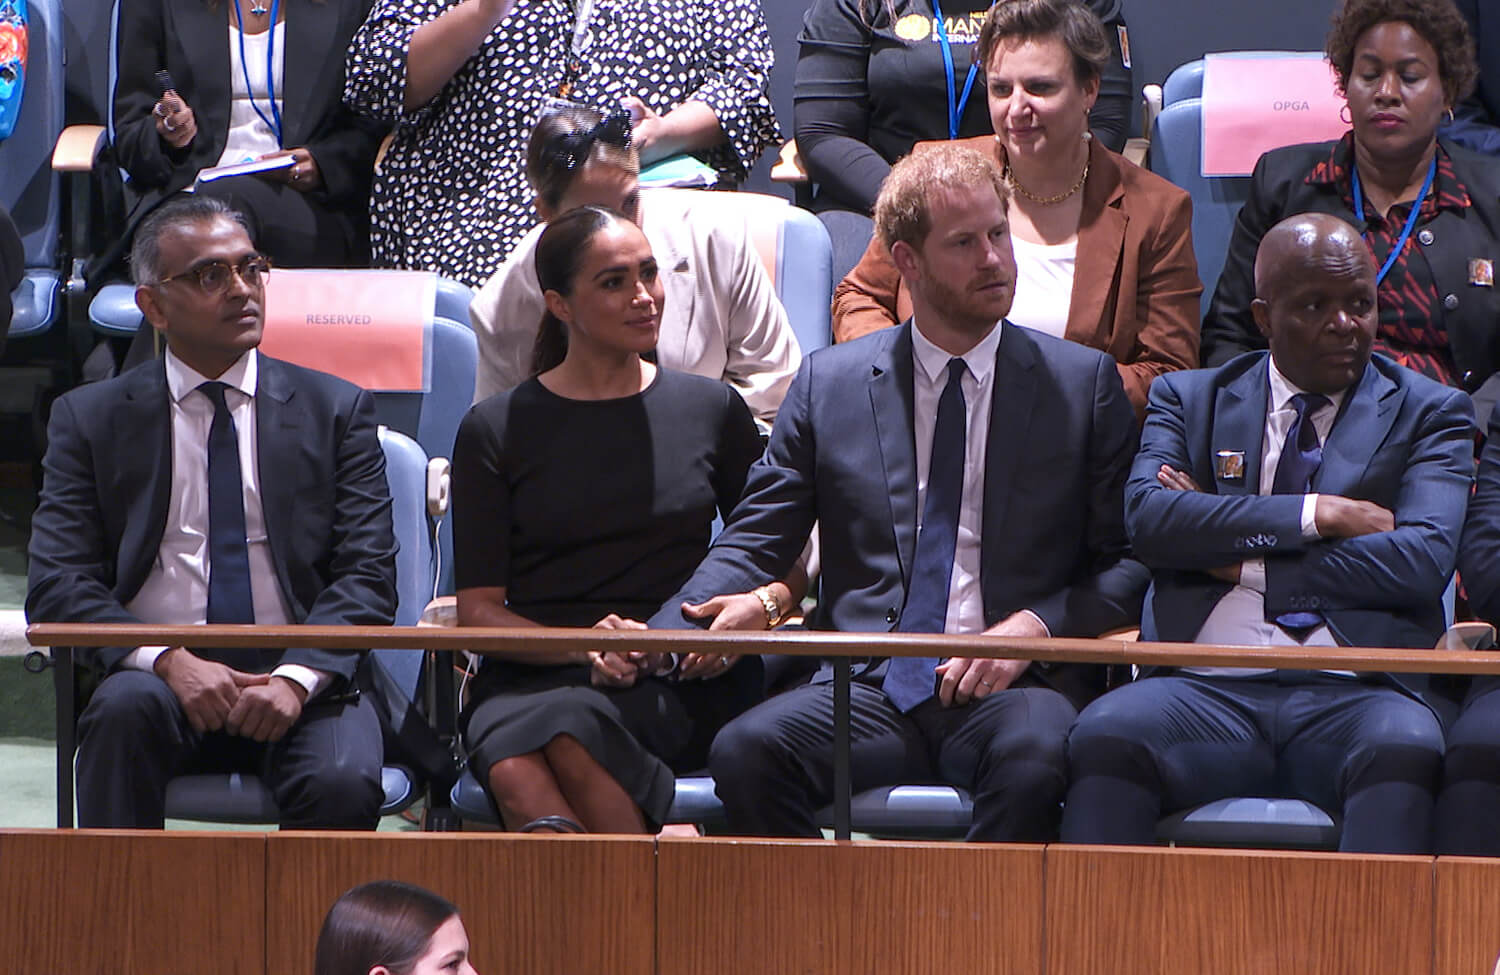 Meghan Markle holds onto Prince Harry's hand and arm as they look to the side while seated